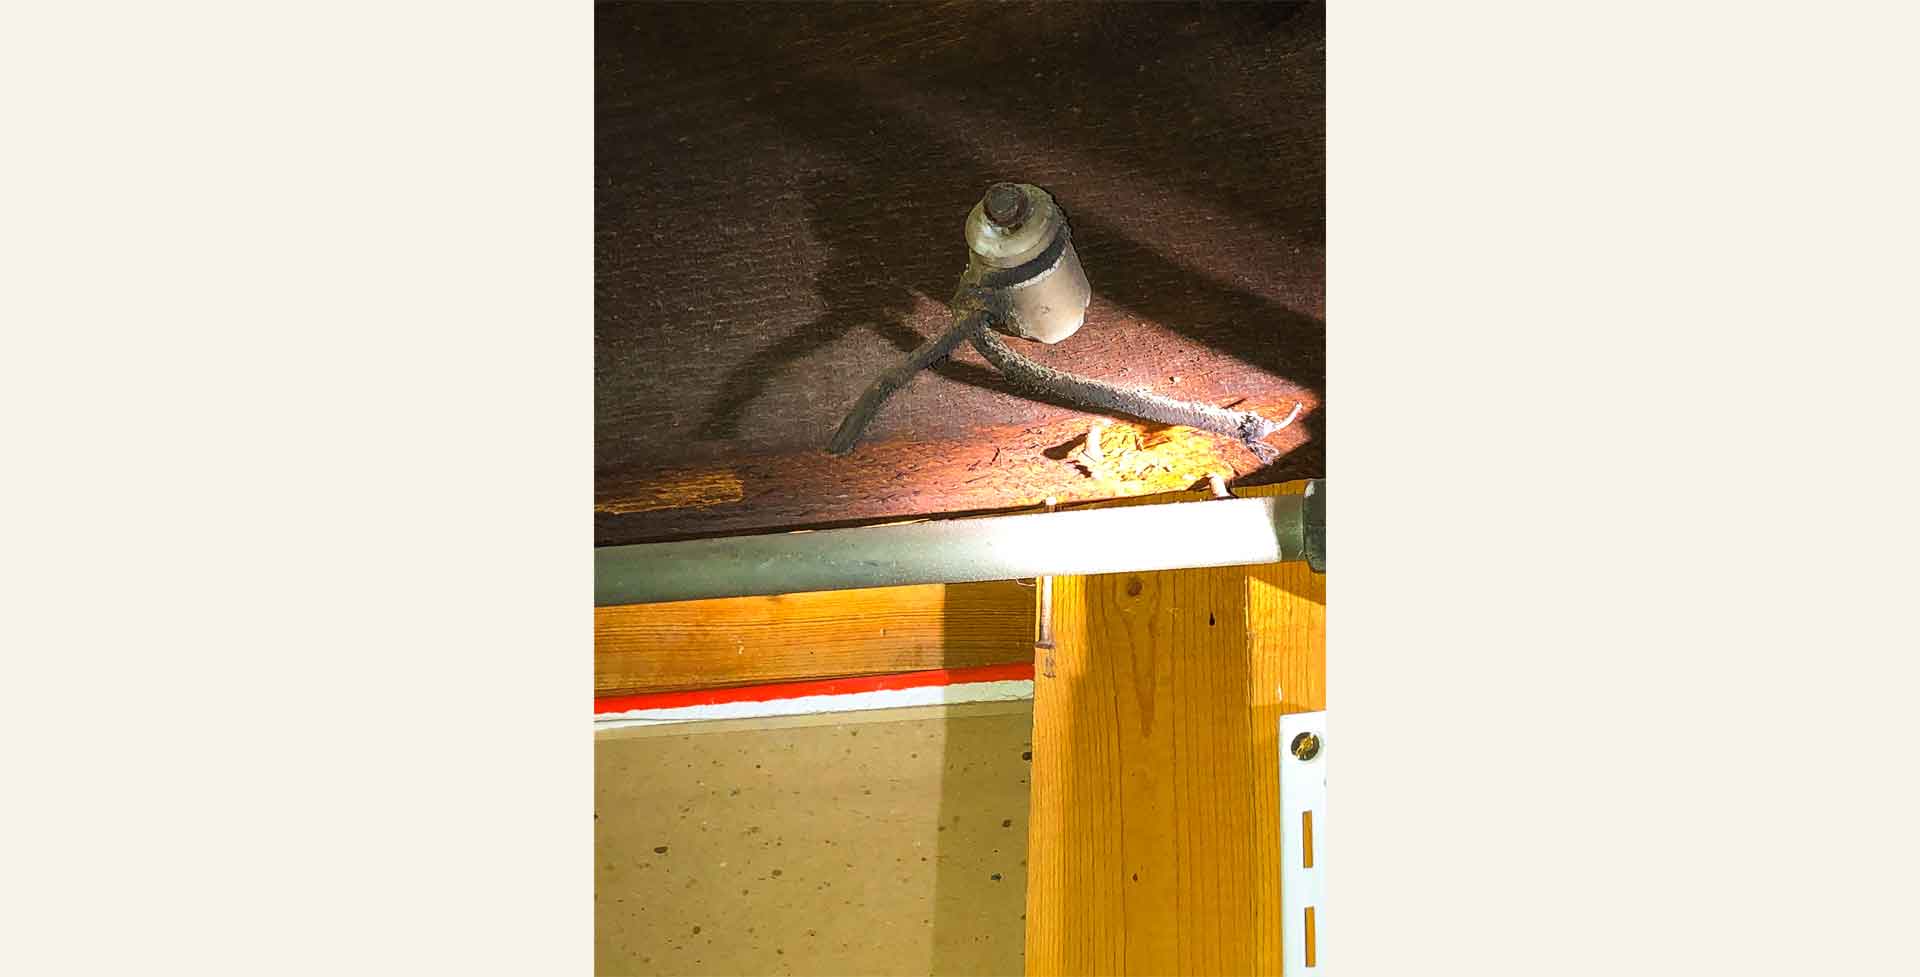 Basement beam with old disabled knob and tube wiring